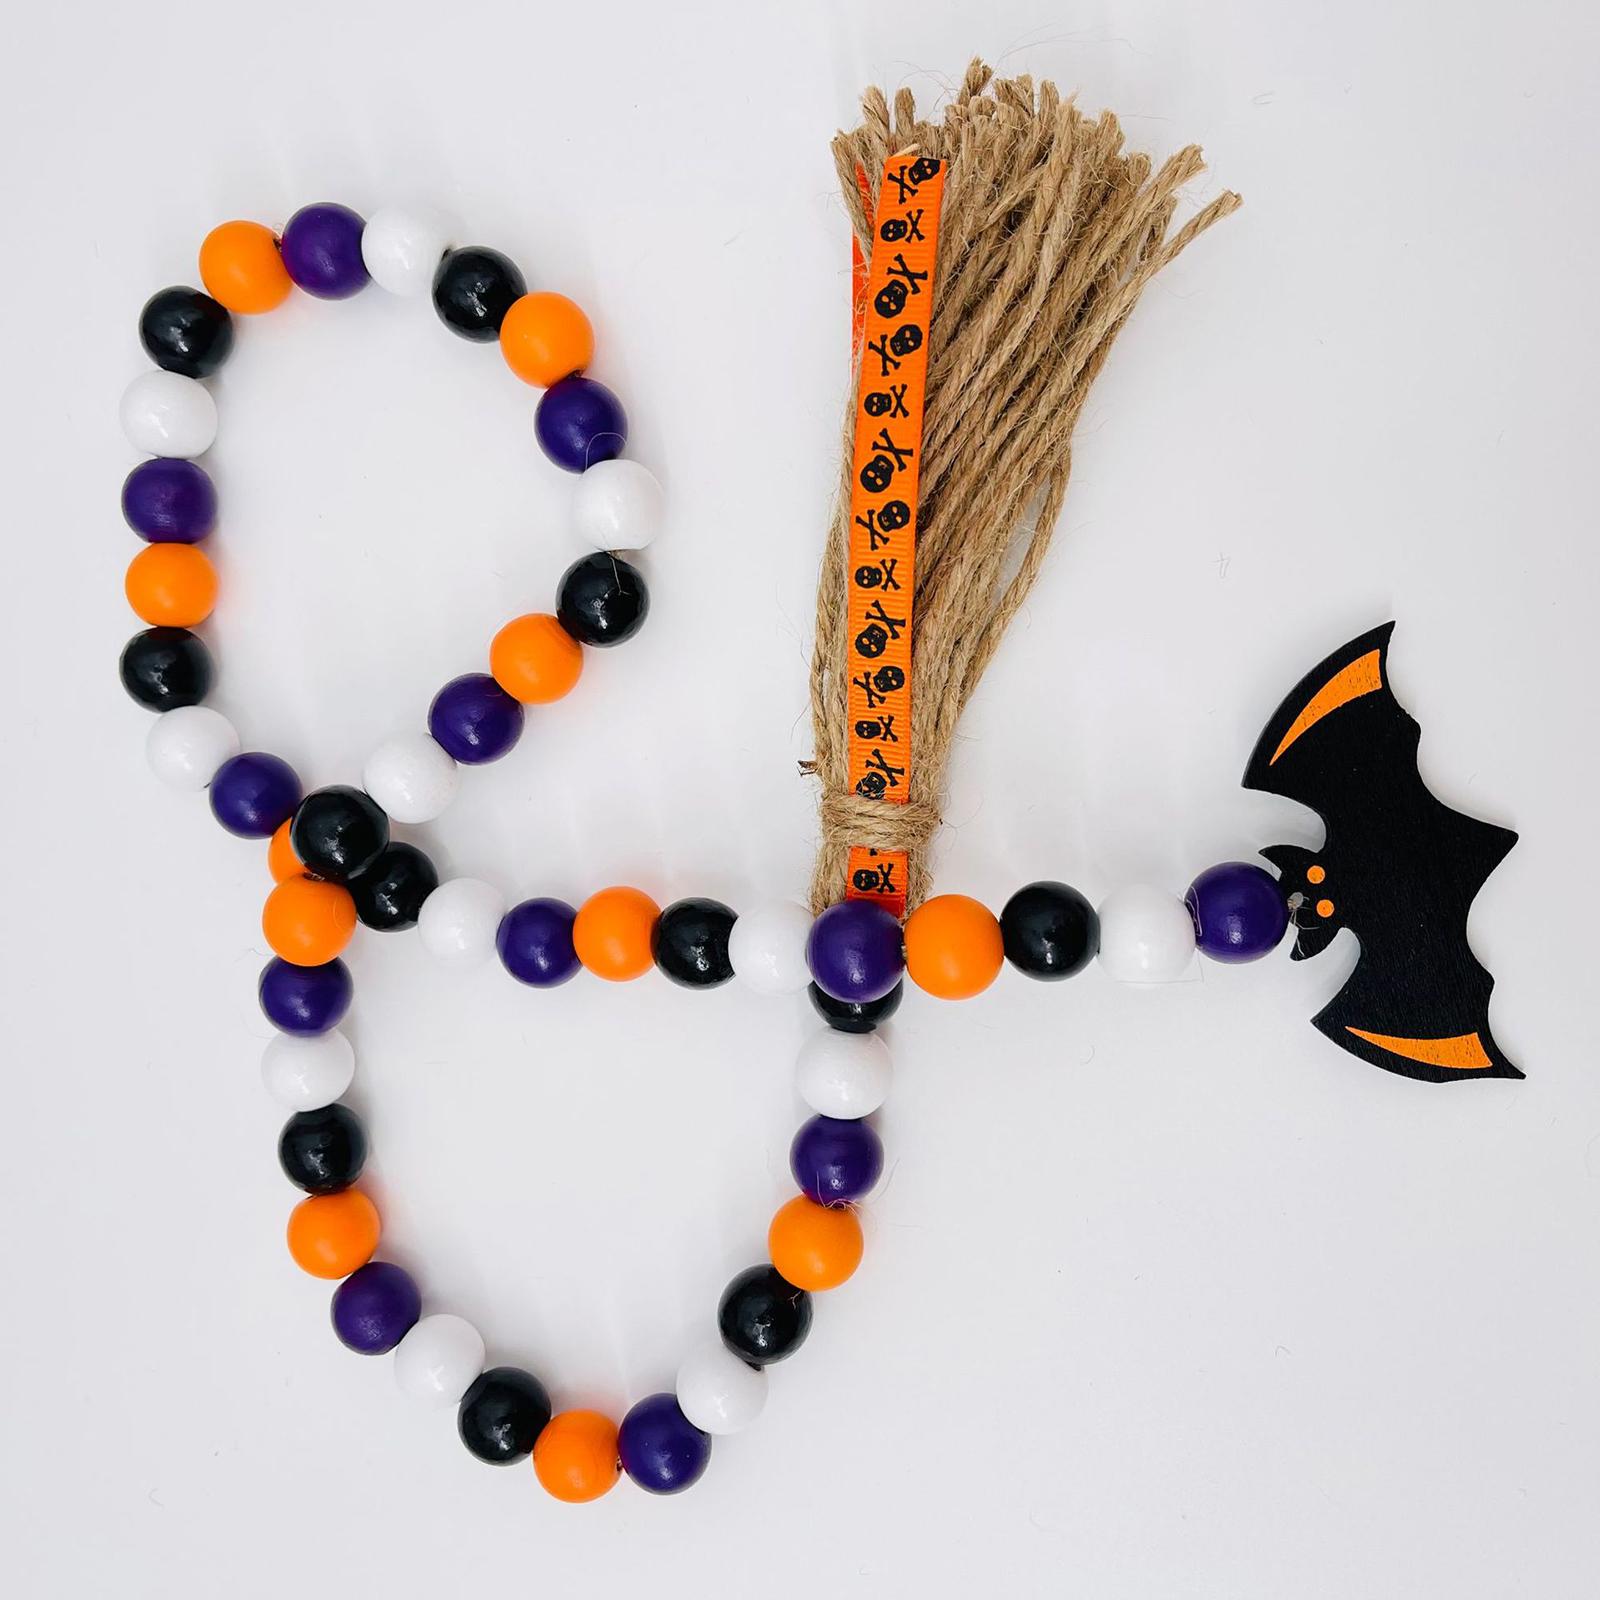 Halloween Wood Bead Garland with Tassels Art for Home Bedroom Party Supplies Black Pendant